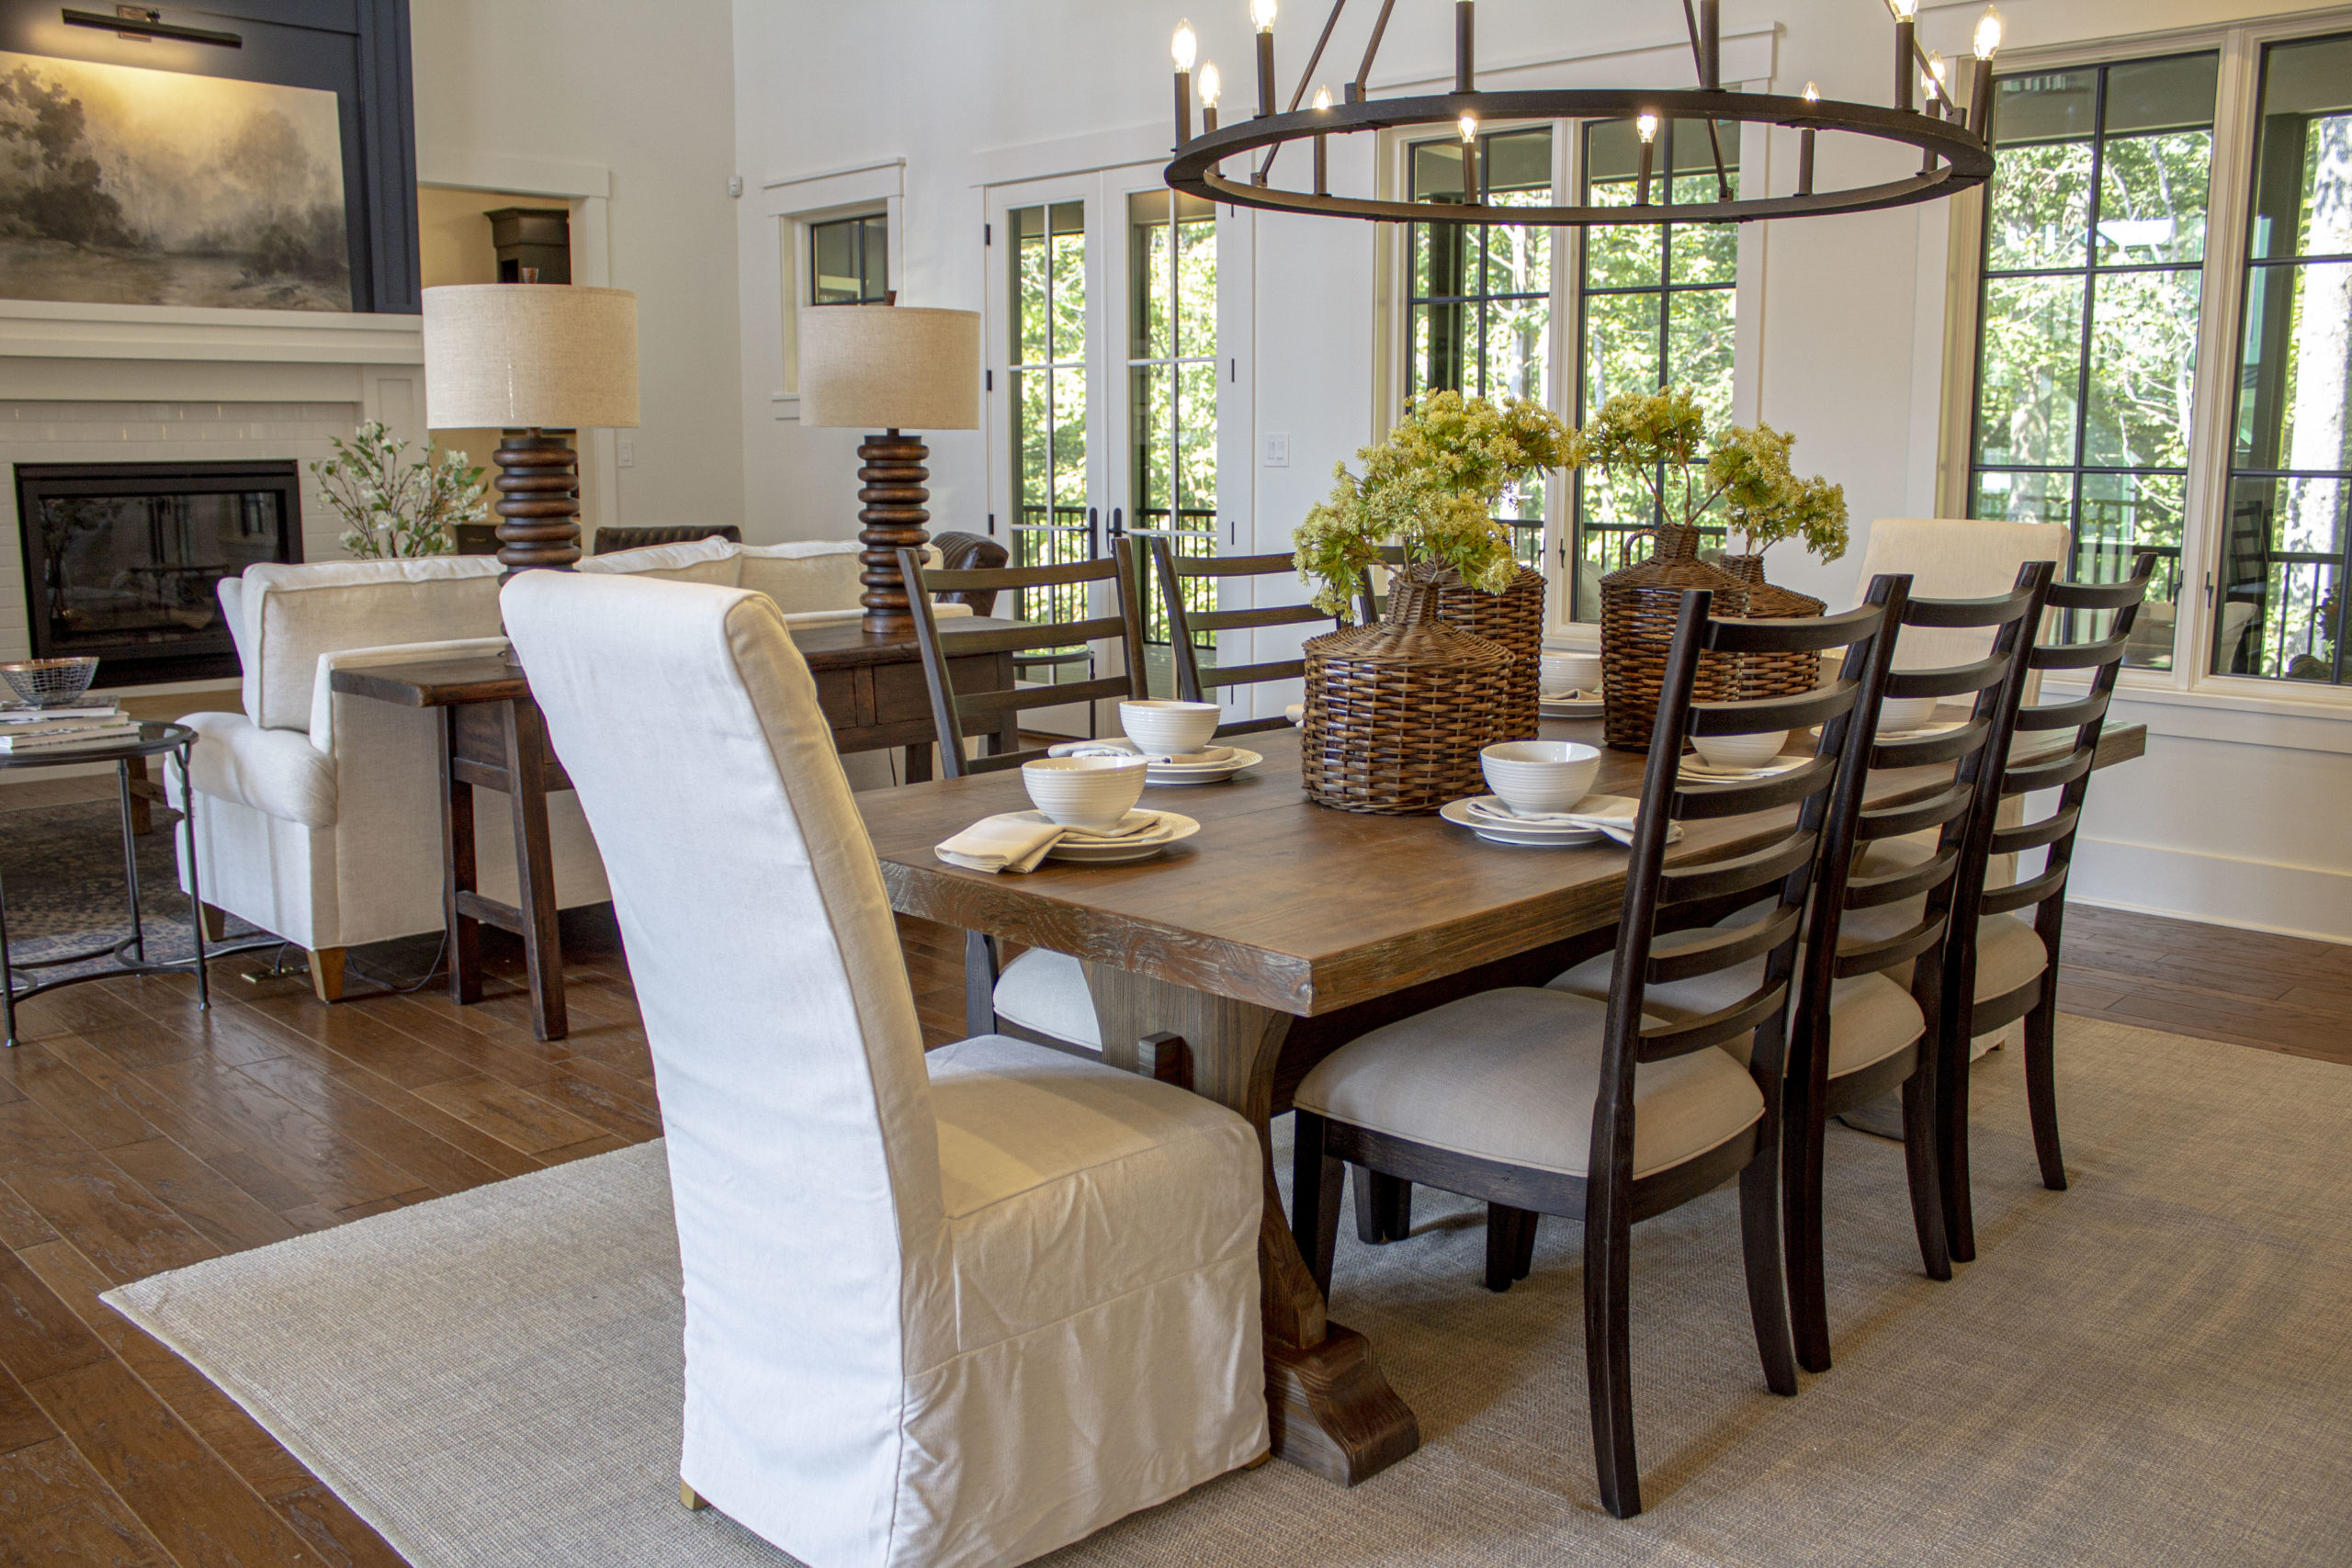 Rustic Dining Rooms: How to Achieve the Look